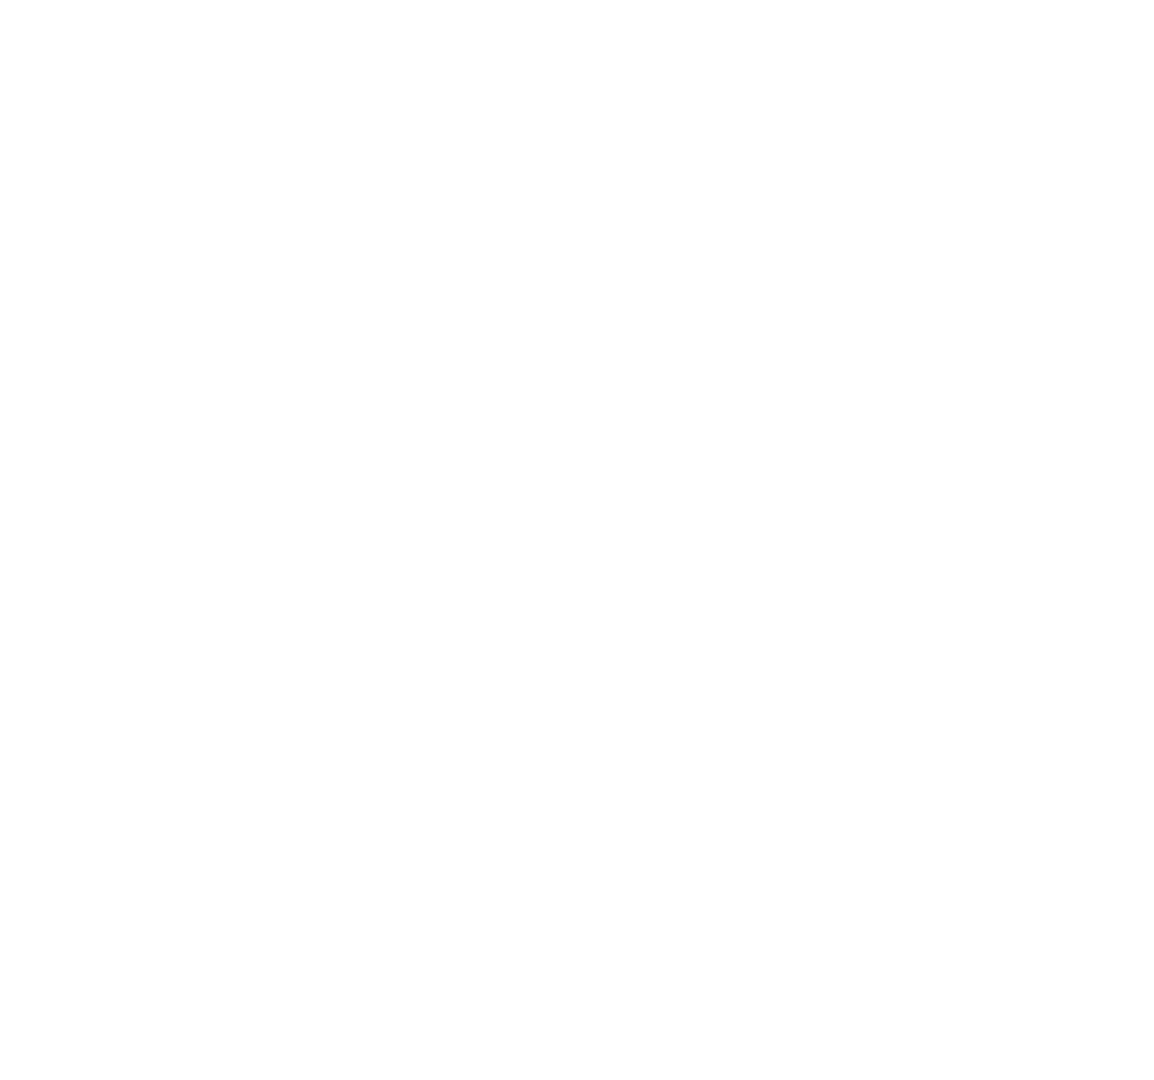 A green and white logo with an x in the middle.